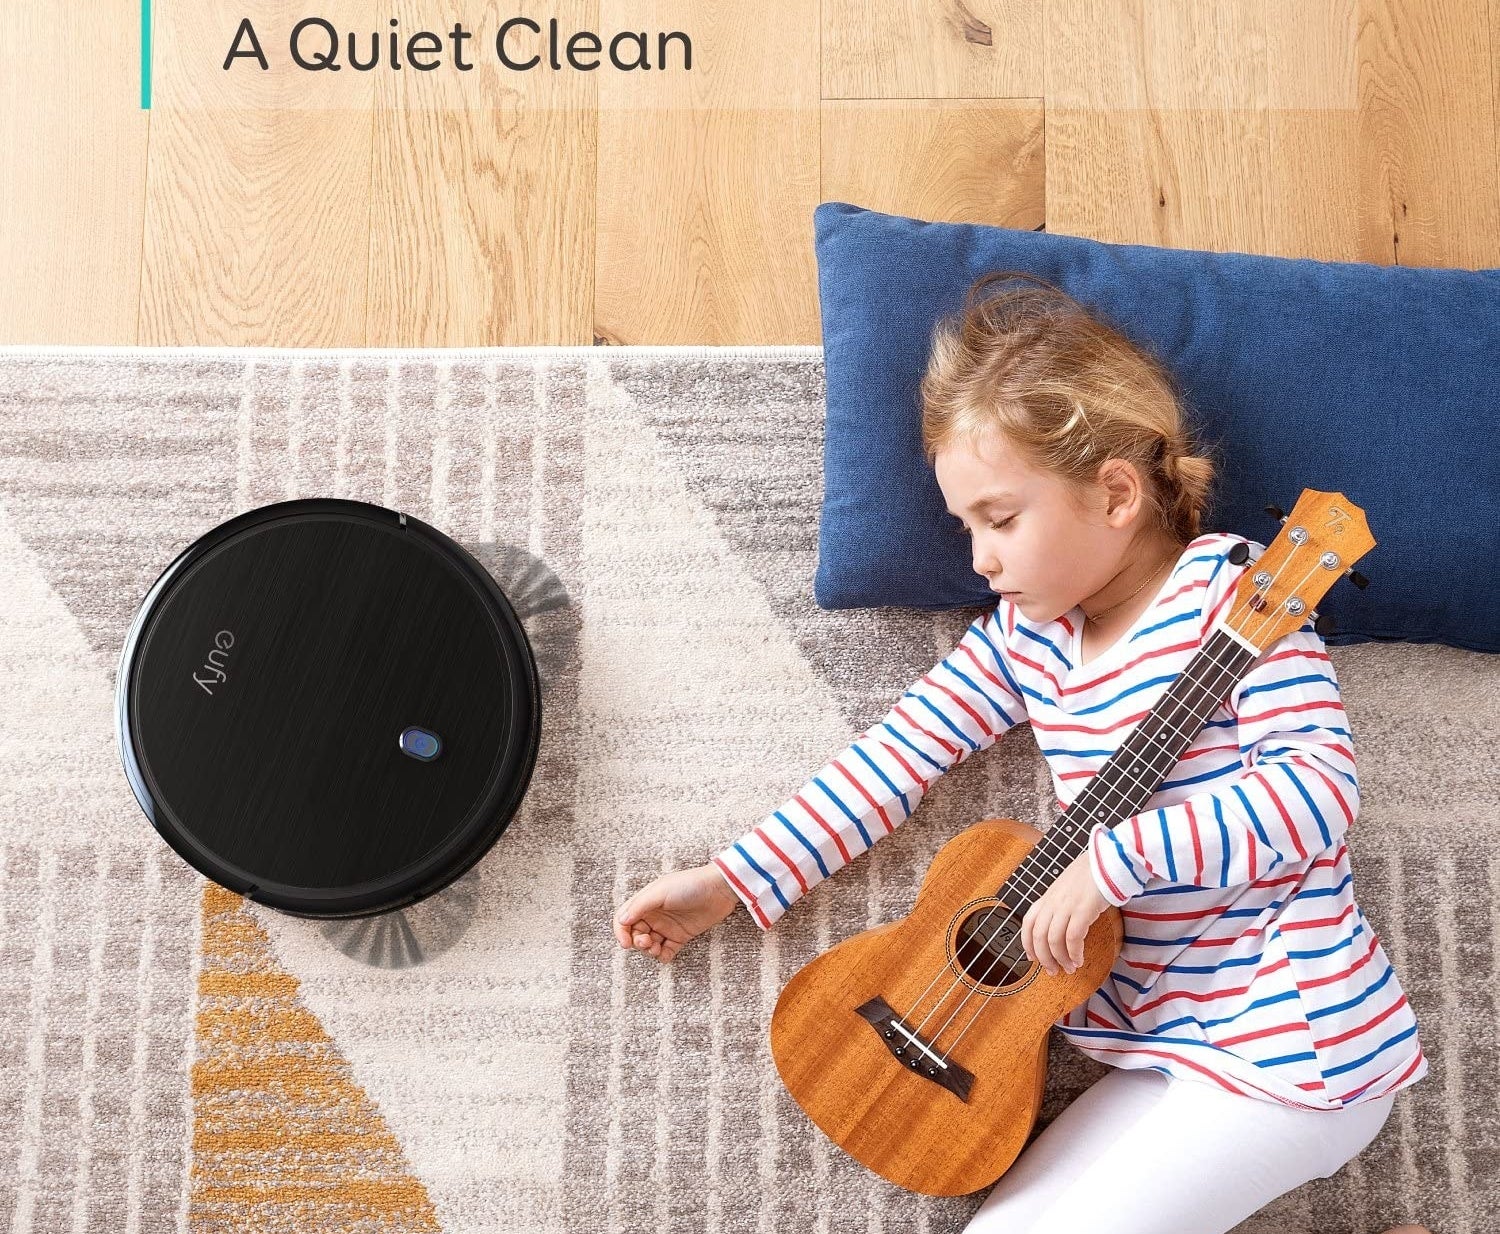 Child holding guitar and sleeping next to Eufy robotic vacuum cleaning the carpet